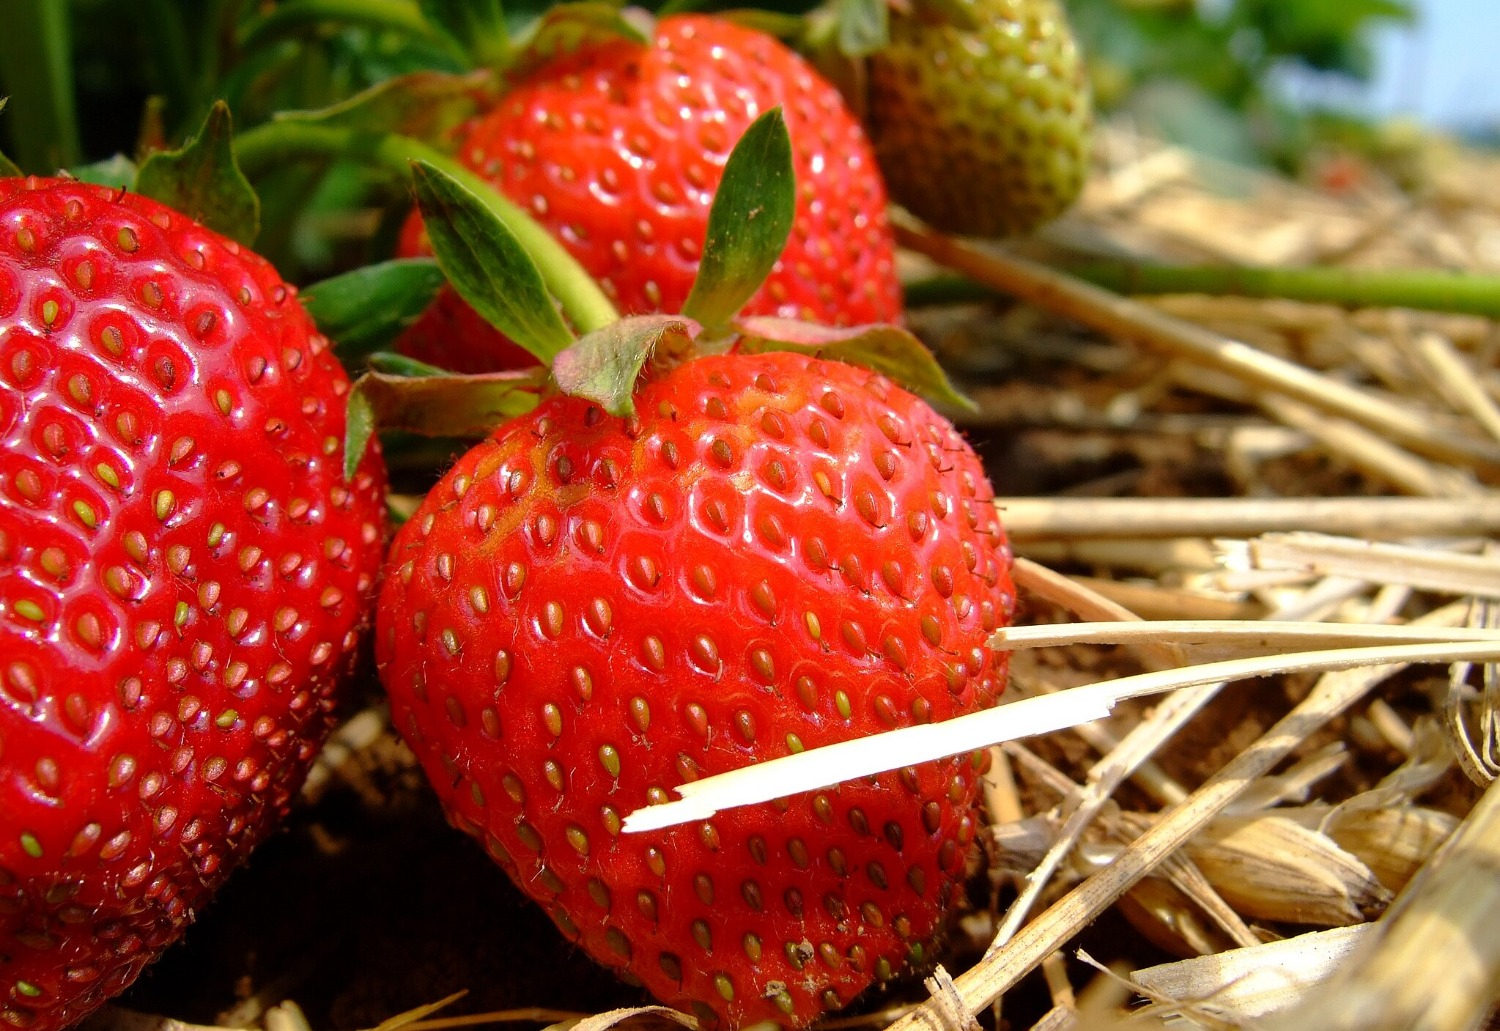 Image of a fresh strawberry.